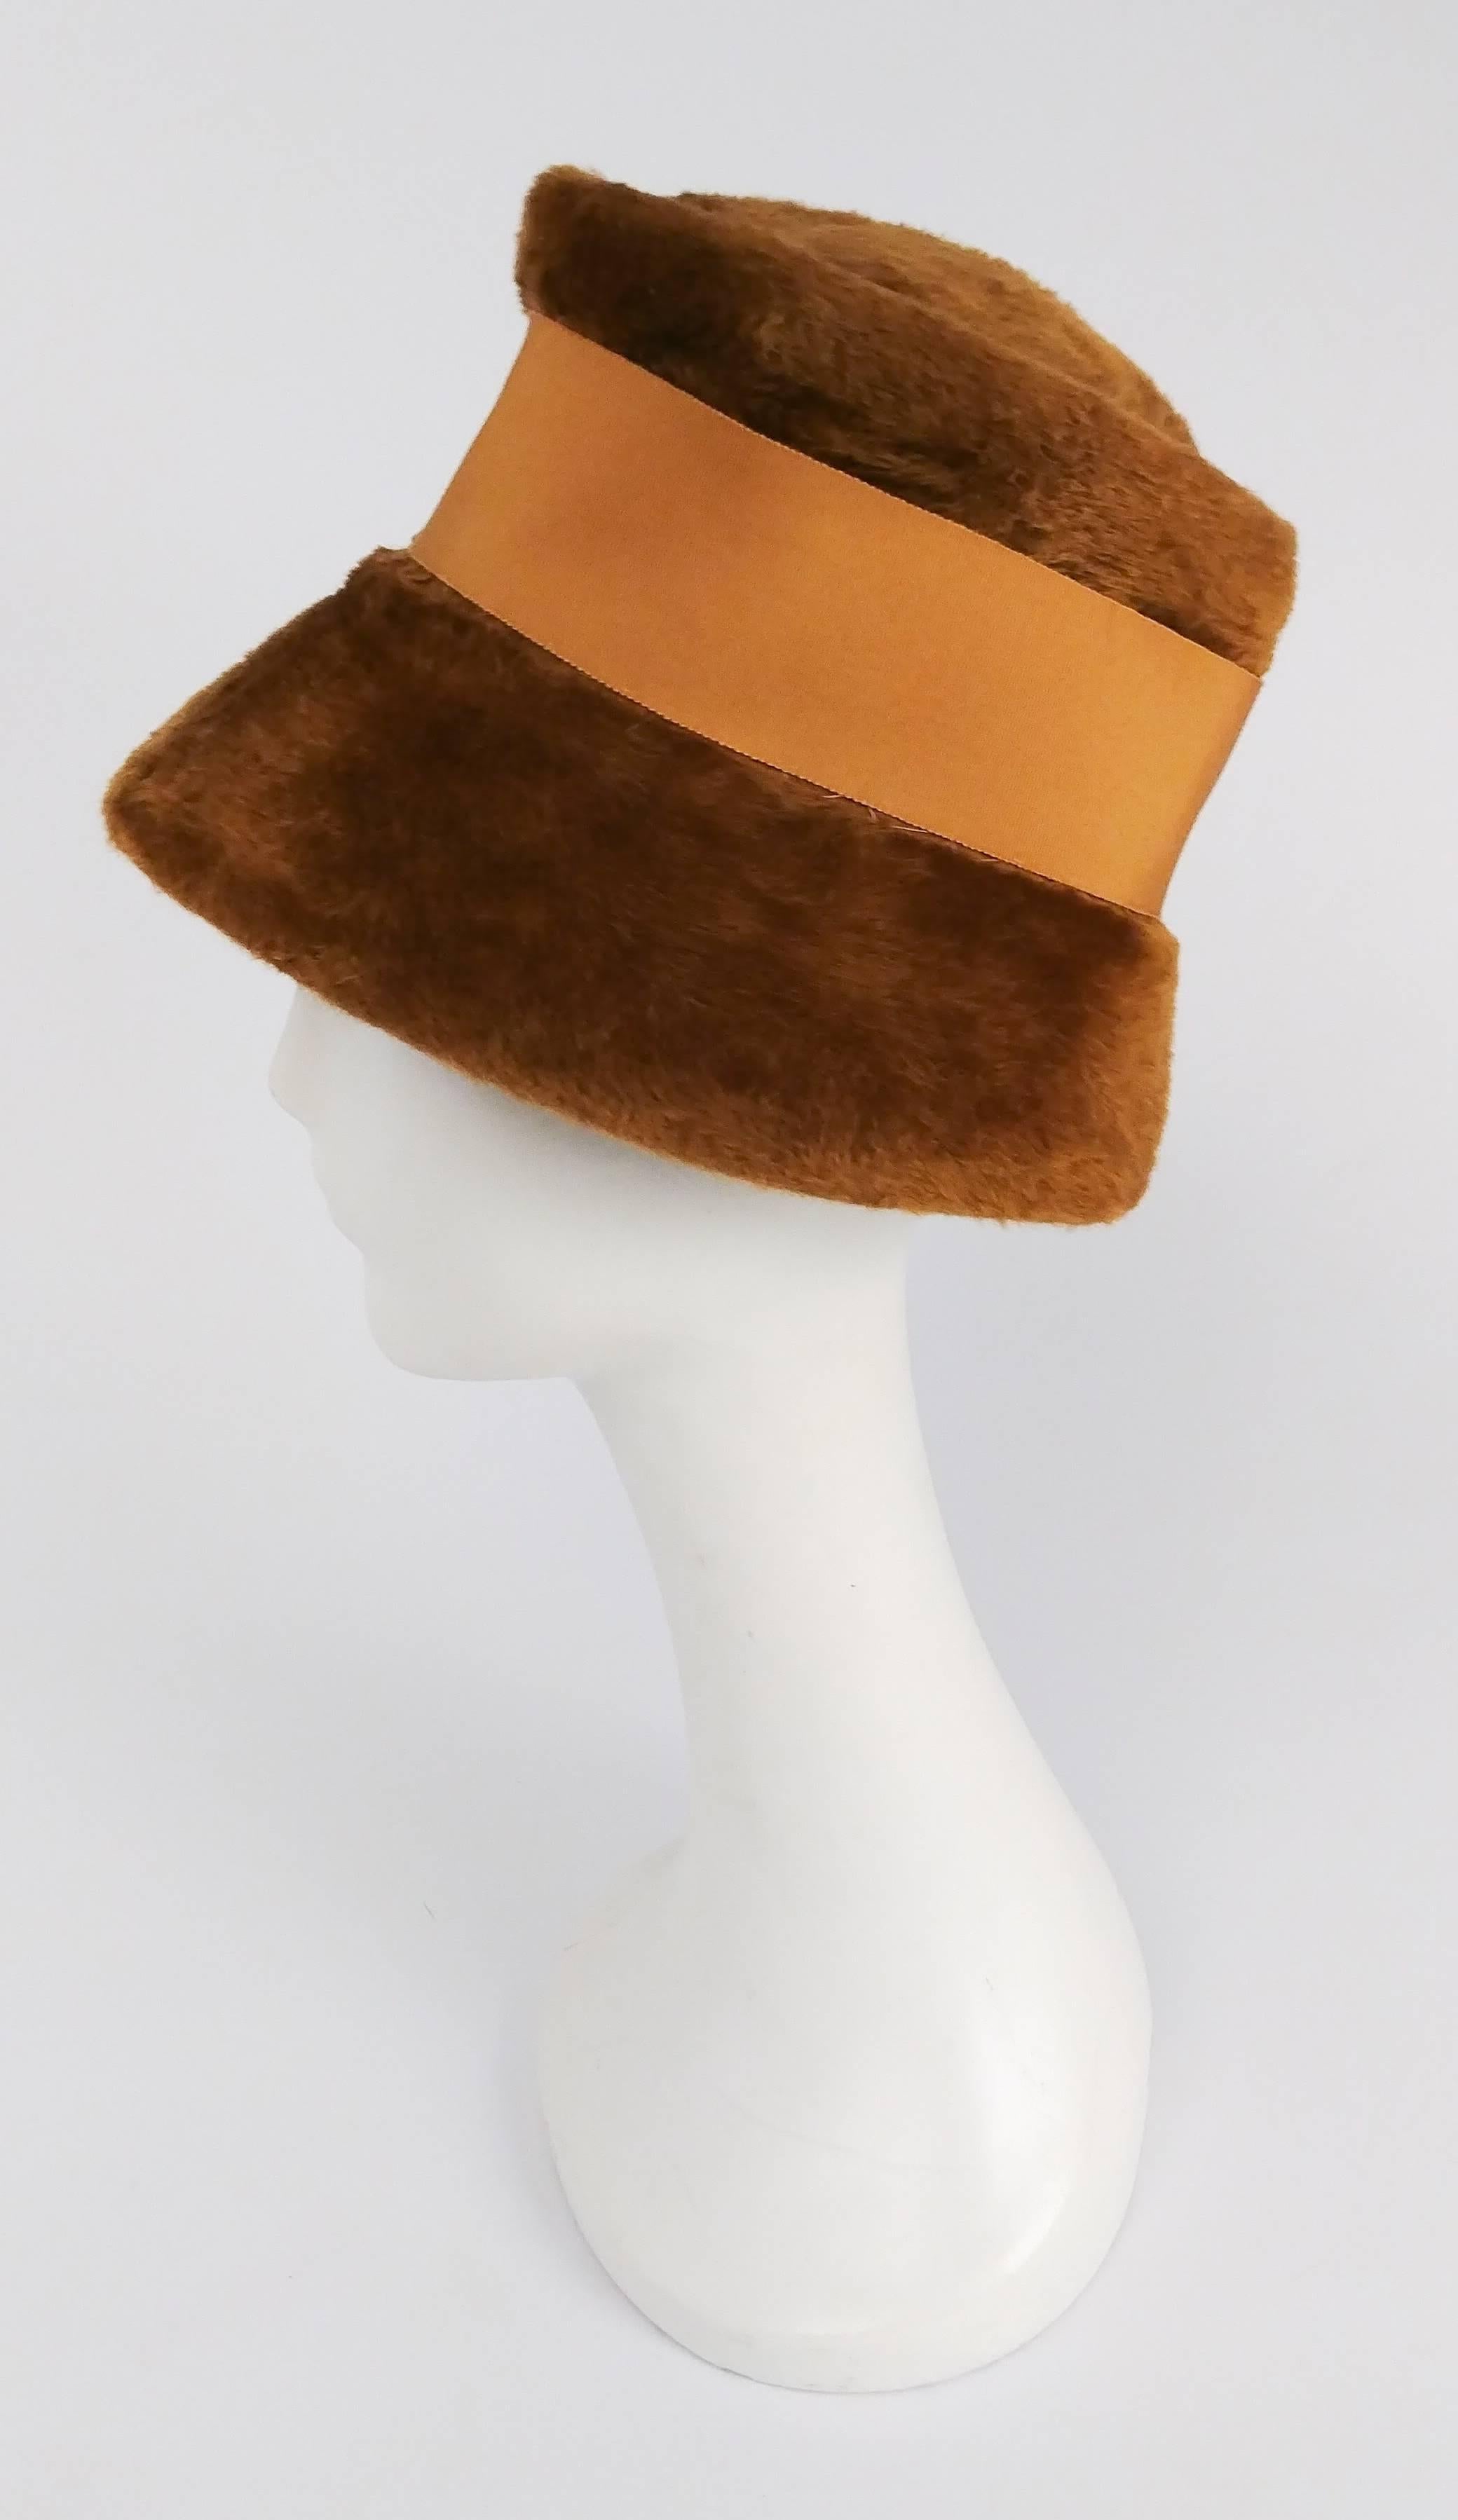 1960s Ochre Yellow Mod Hat w/ Grosgrain Ribbon. Cloche style hat sits low over the eyes, decorated with a wide ribbon. 